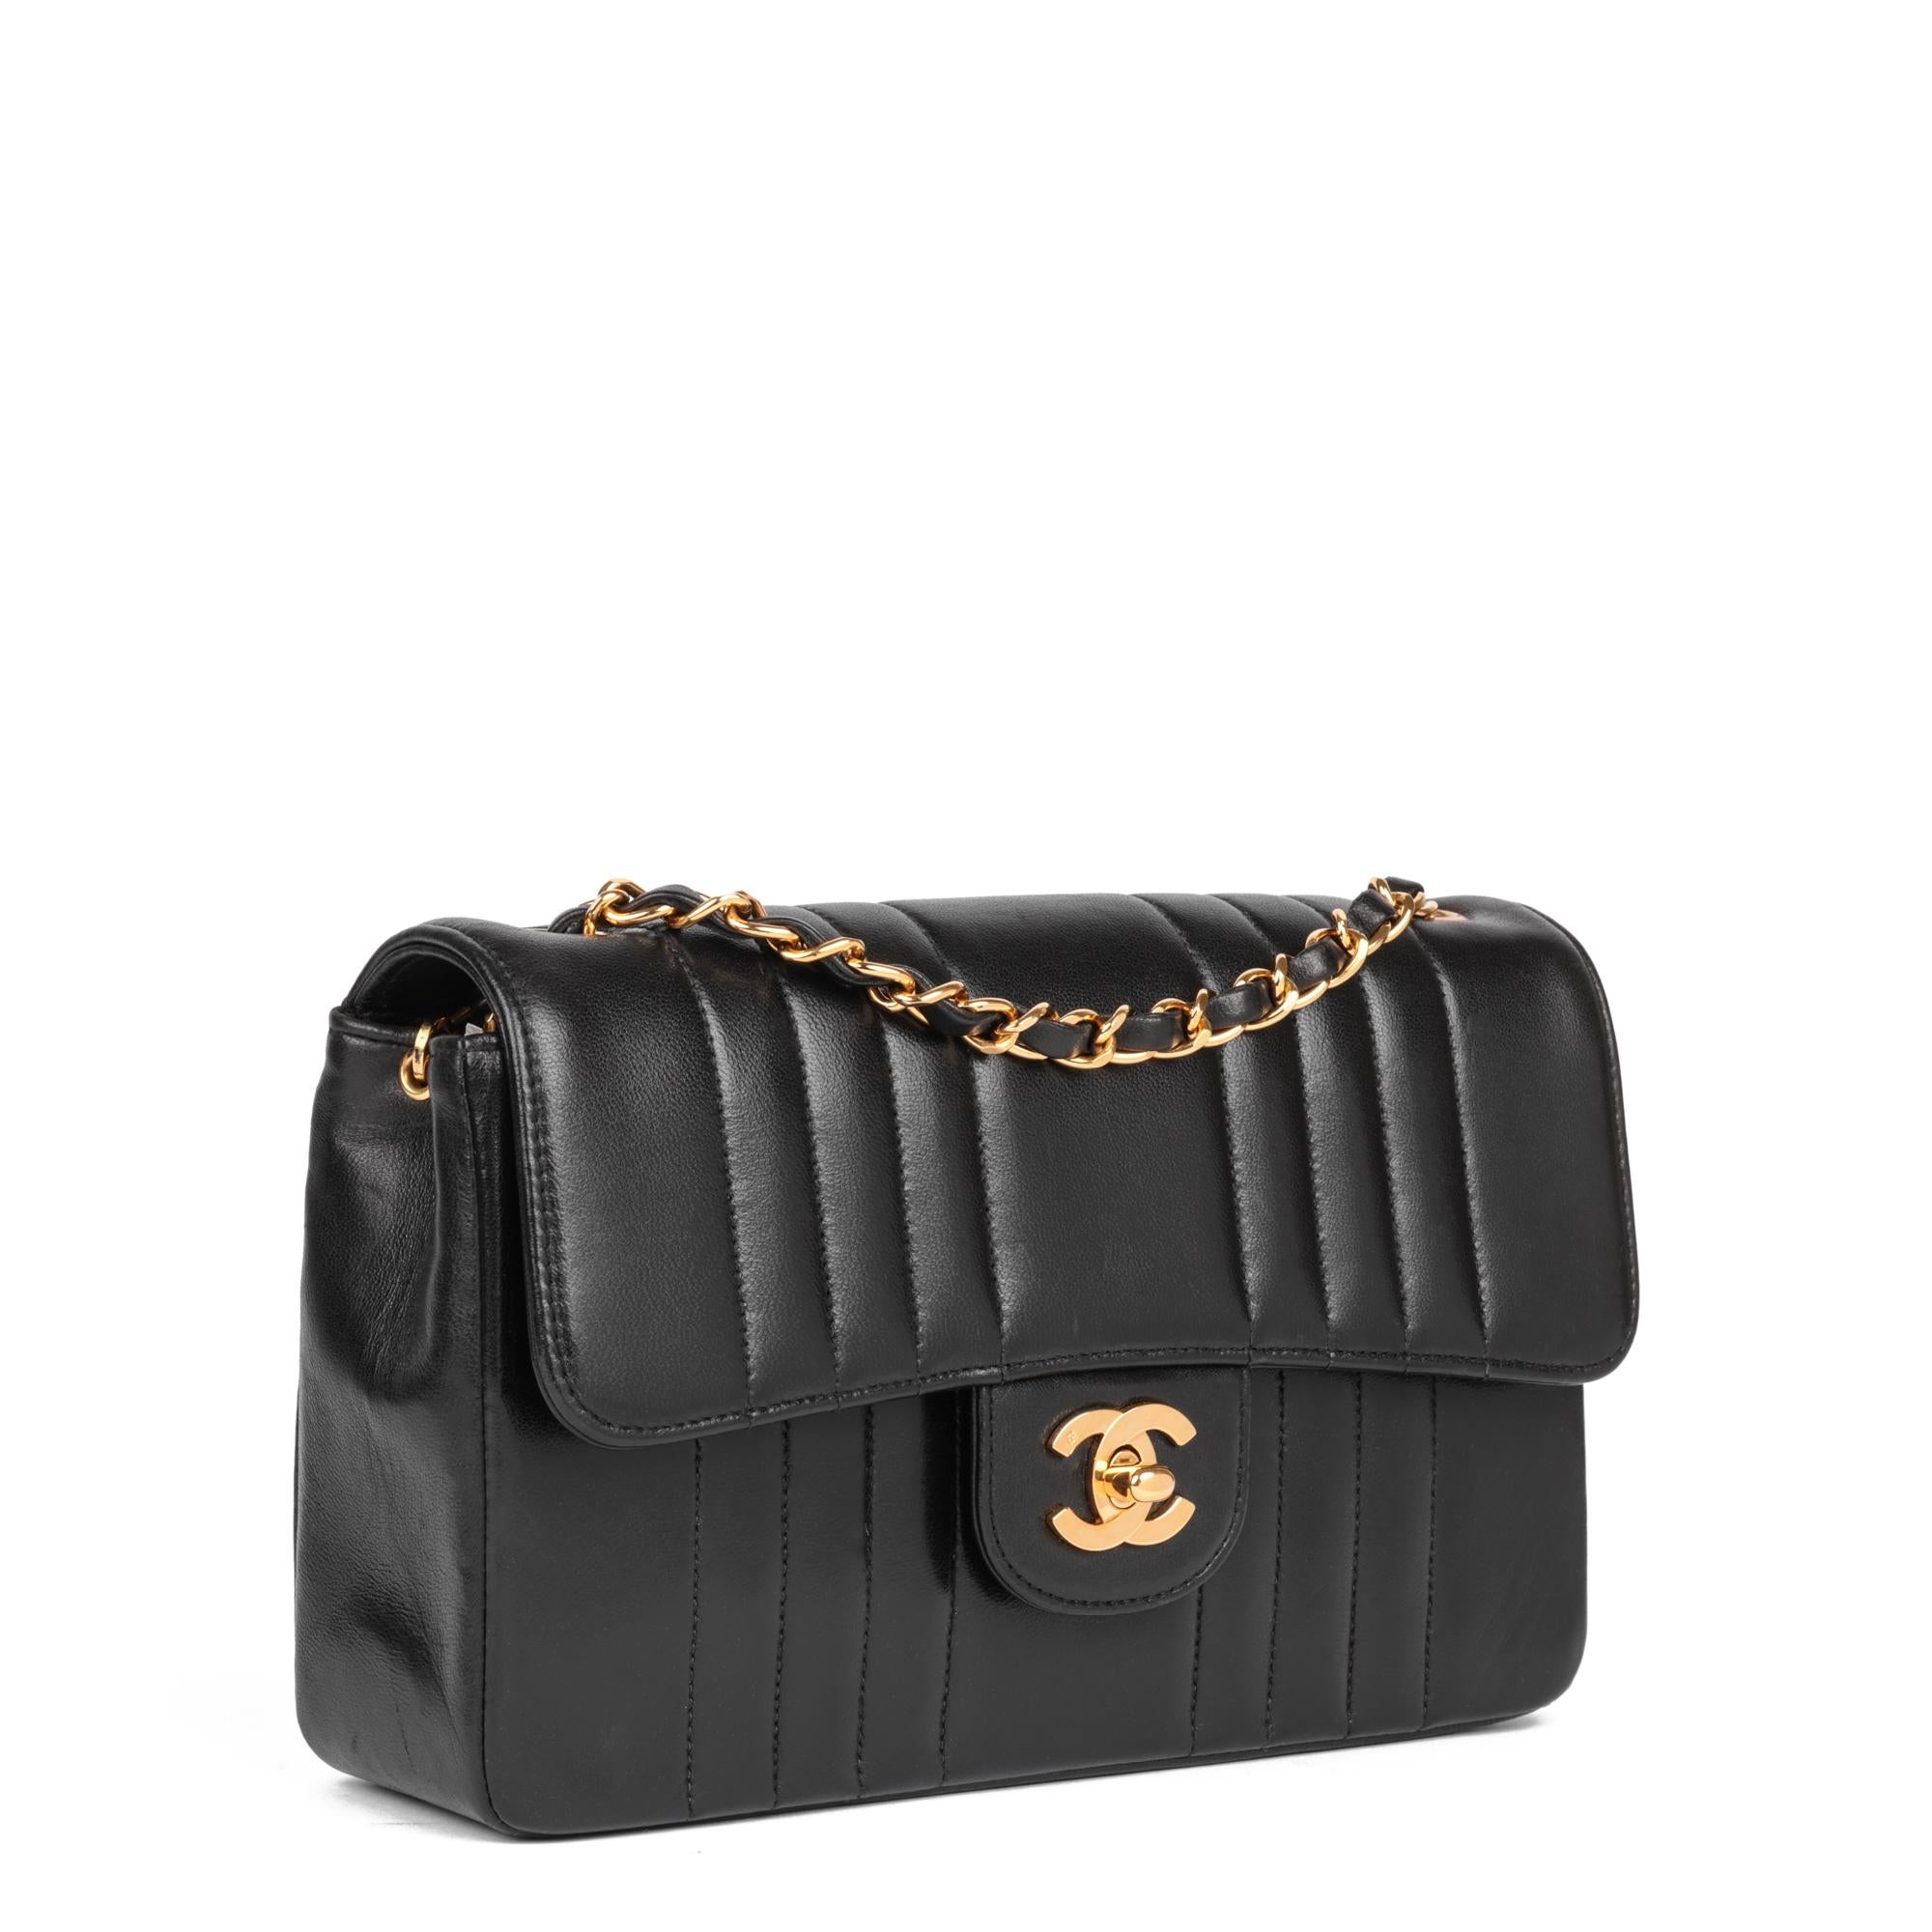 CHANEL
Black Vertical Quilted Lambskin Vintage Small Classic Single Flap Bag

Xupes Reference: HB5234
Serial Number: 2485744
Age (Circa): 1991
Accompanied By: Chanel Dust Bag, Authenticity Card
Authenticity Details: Authenticity Card, Serial Sticker